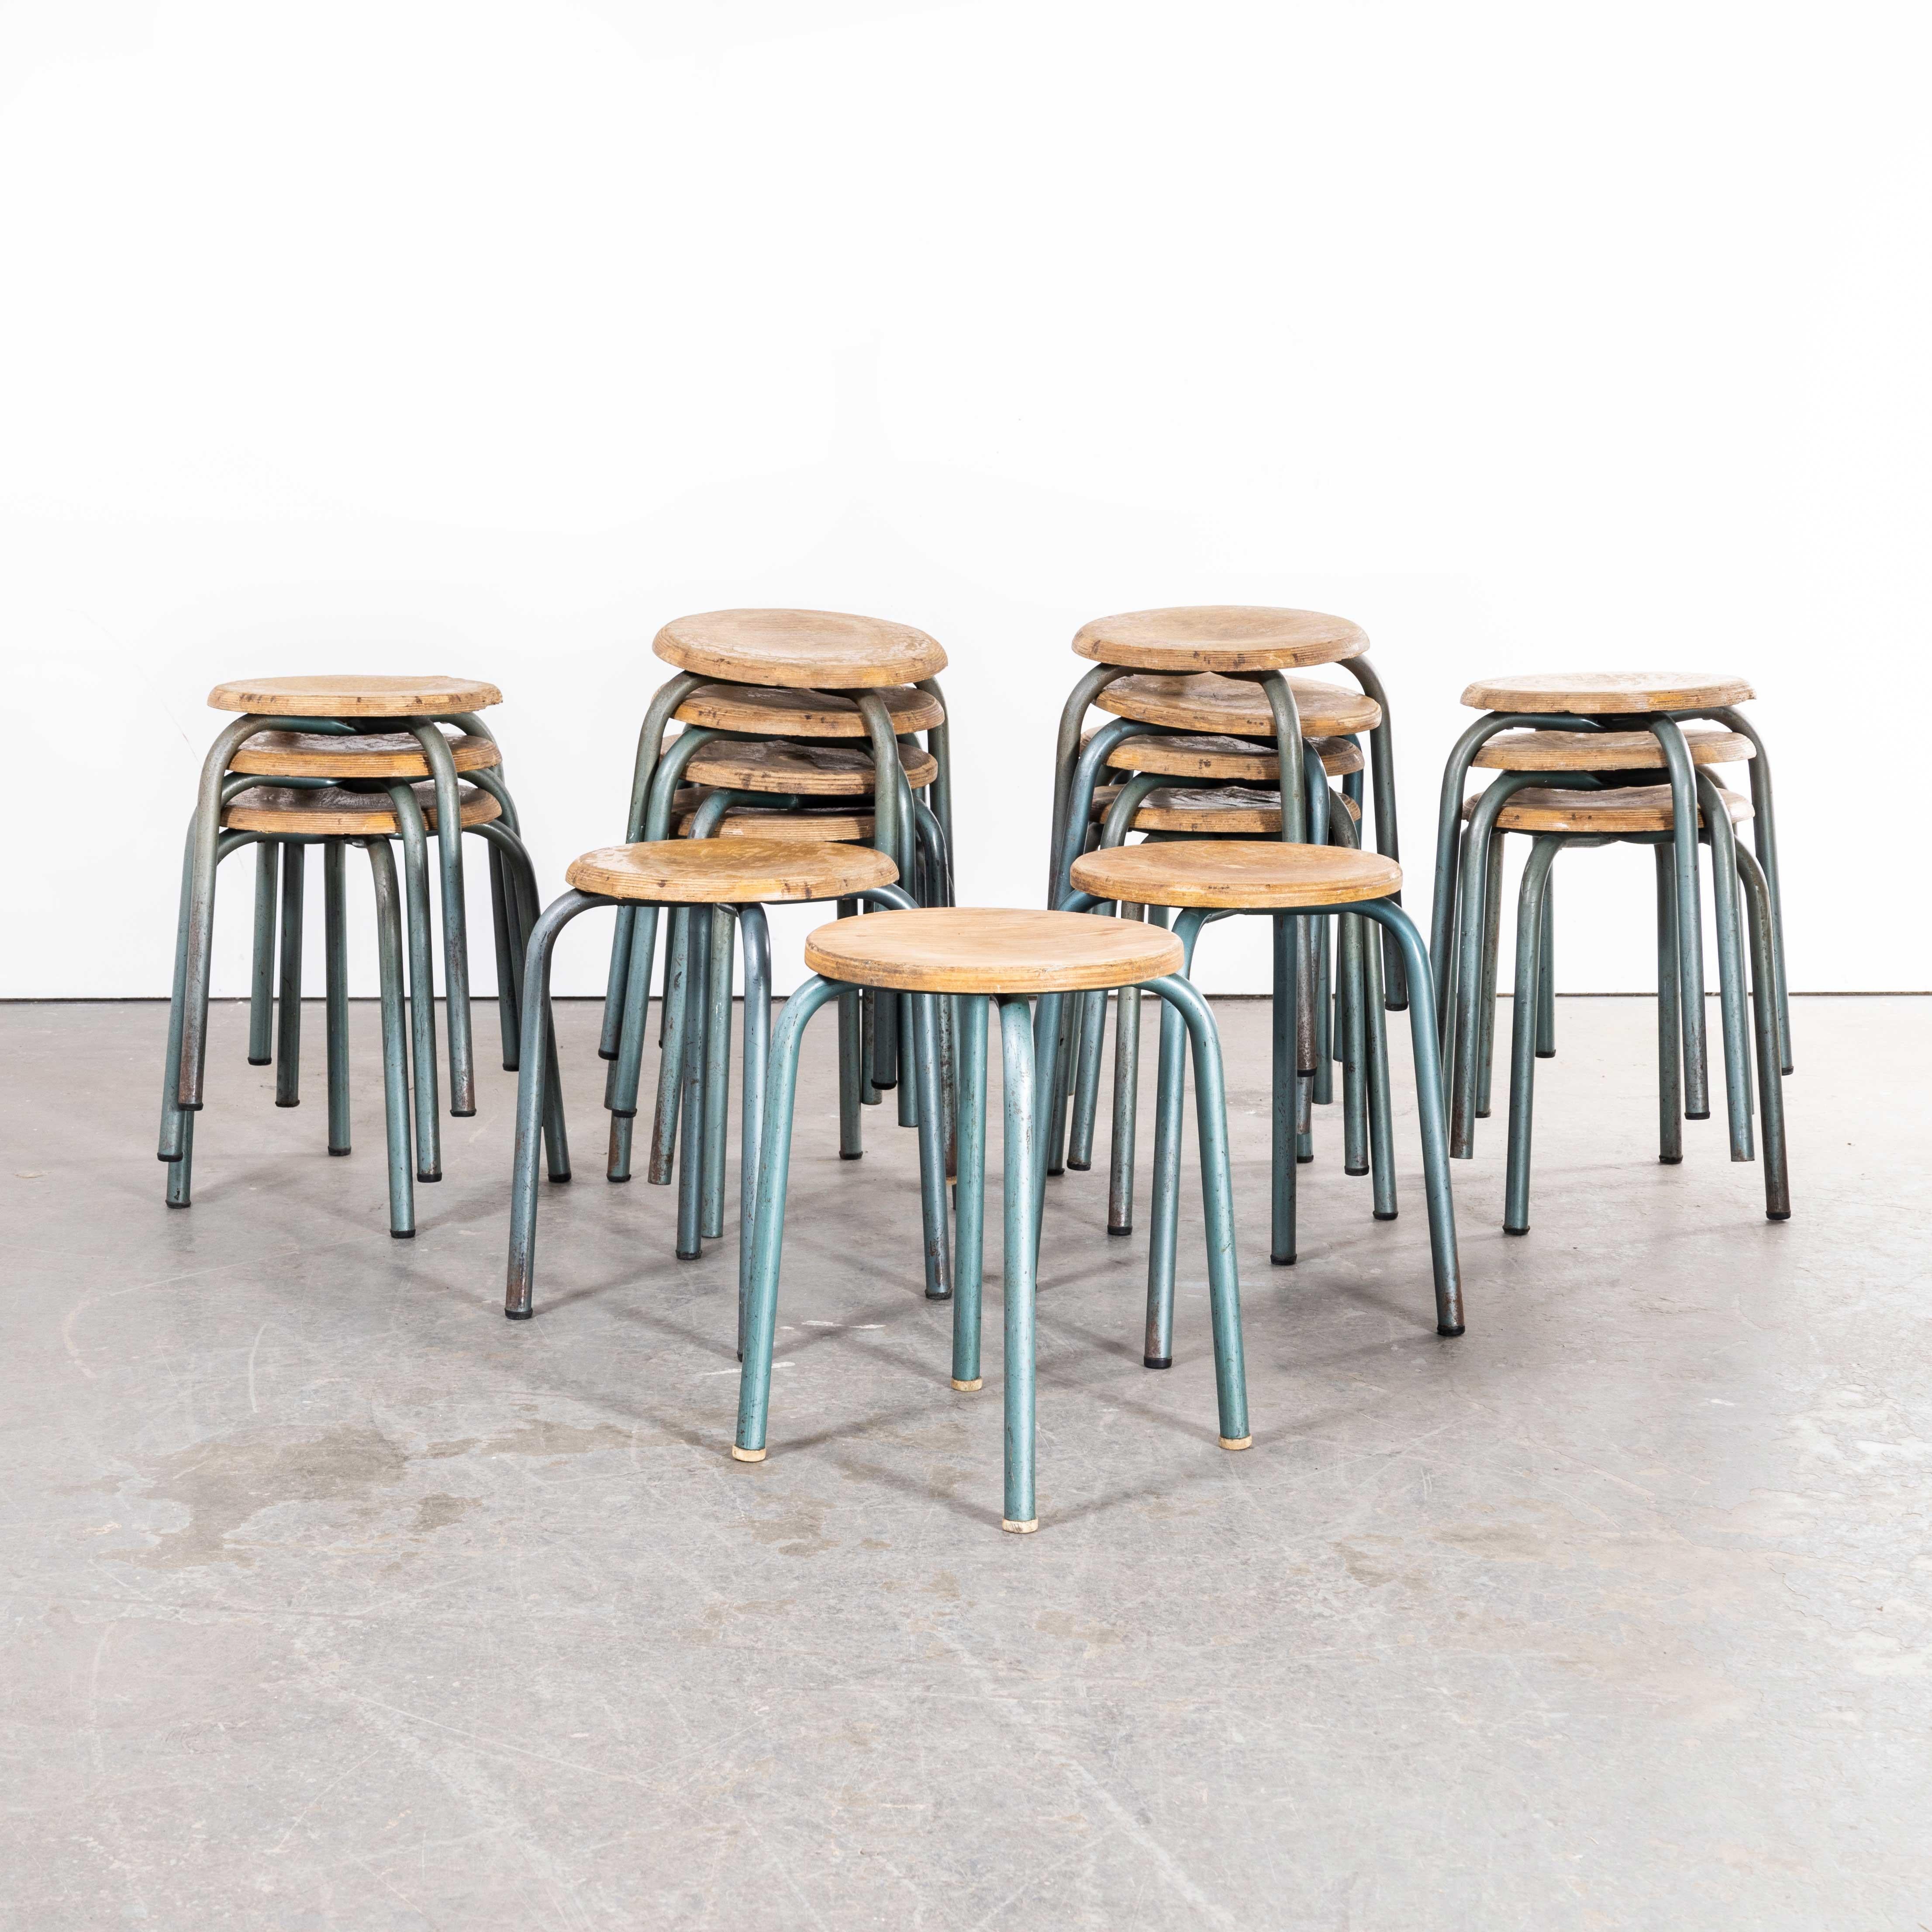 1960s Simple French Stacking School Stools – Aqua – Various Quantities Available
1960s Simple French Stacking School Stools – Aqua – Various Quantities Available. Classic French school stools, solid beech laminated tops with strong metal bases.